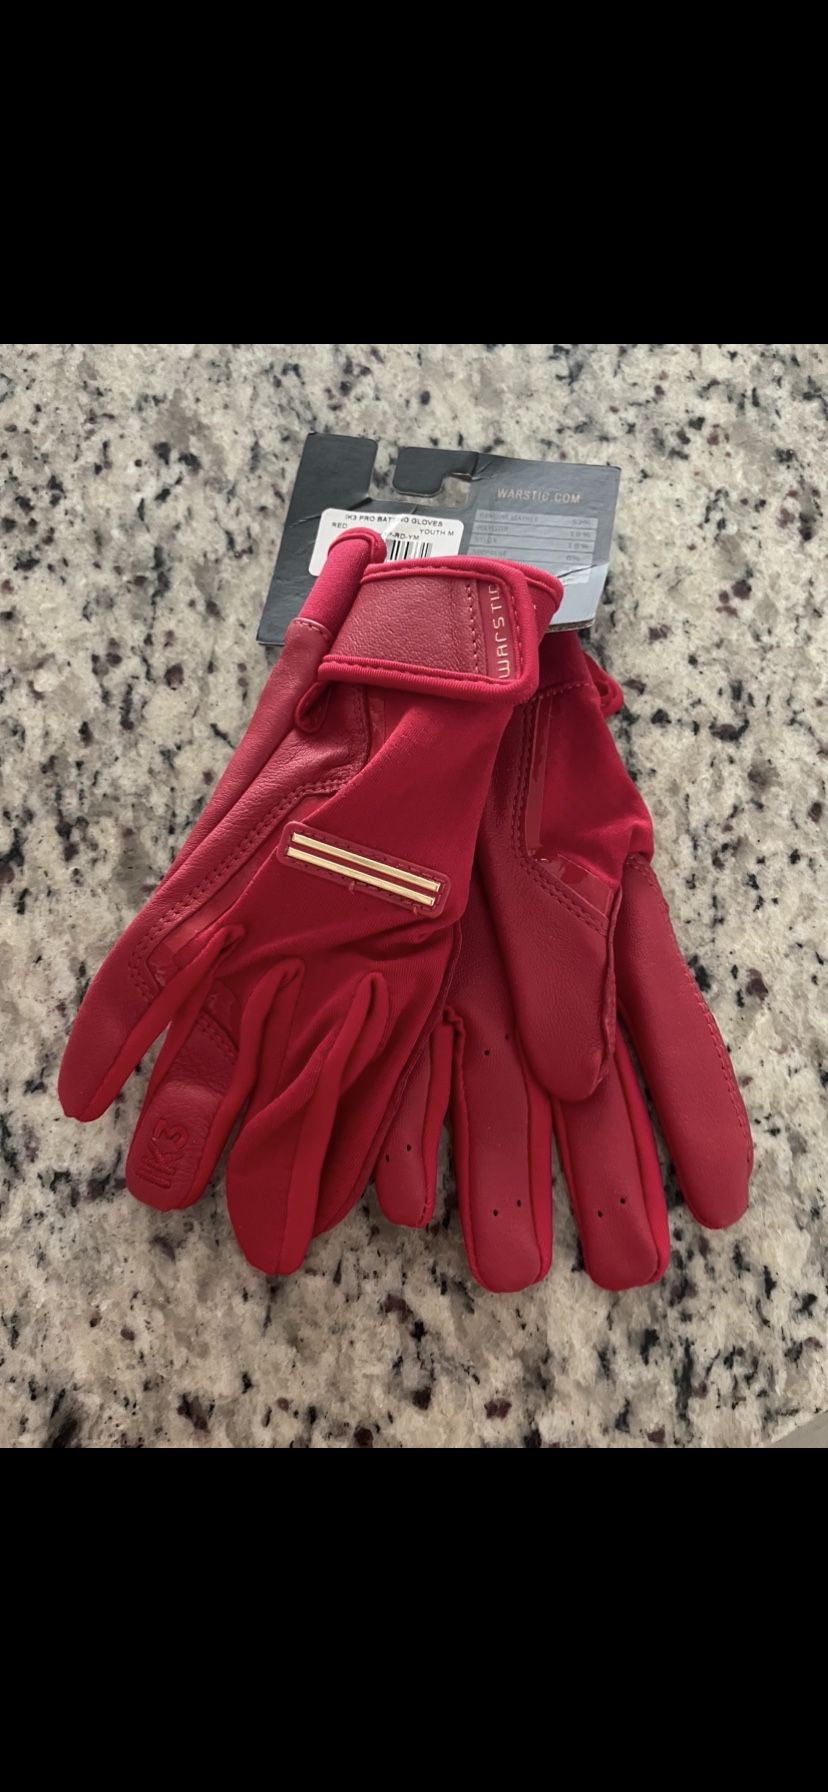 Warstic Red Batting Gloves Size Youth M